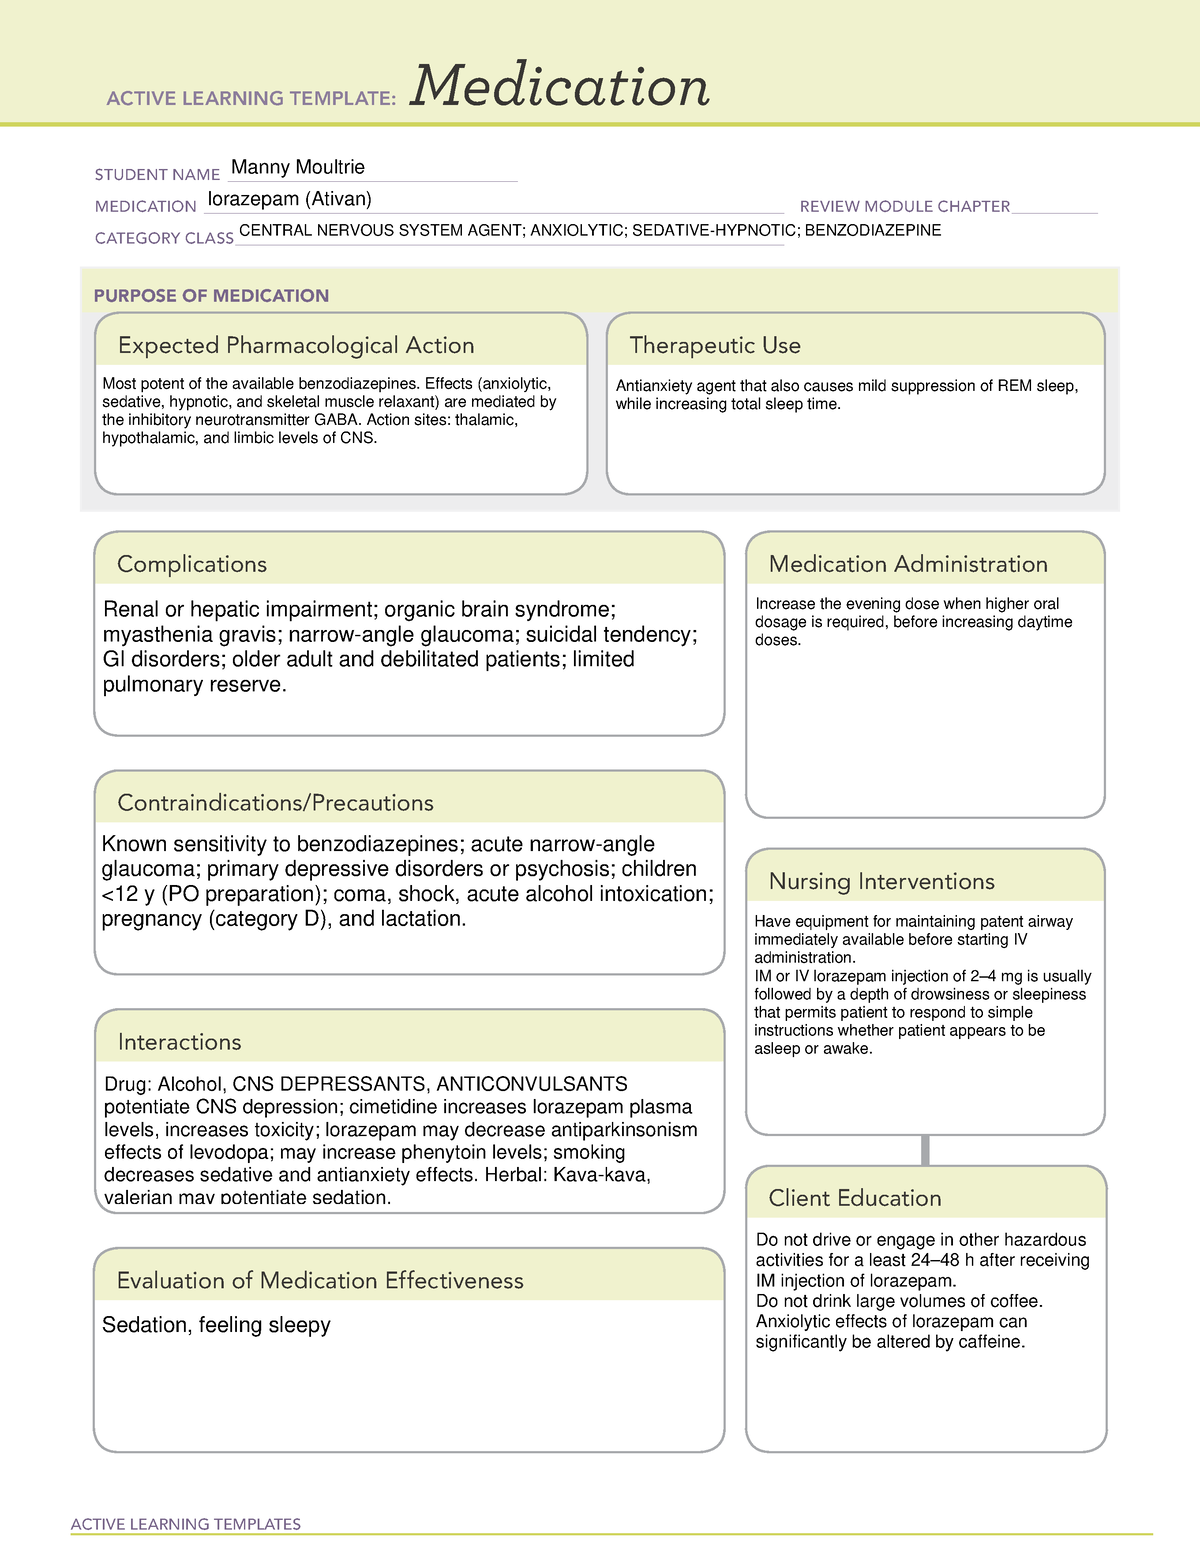 Ativan Medication Template for ATI - ####### ACTIVE LEARNING TEMPLATES ...